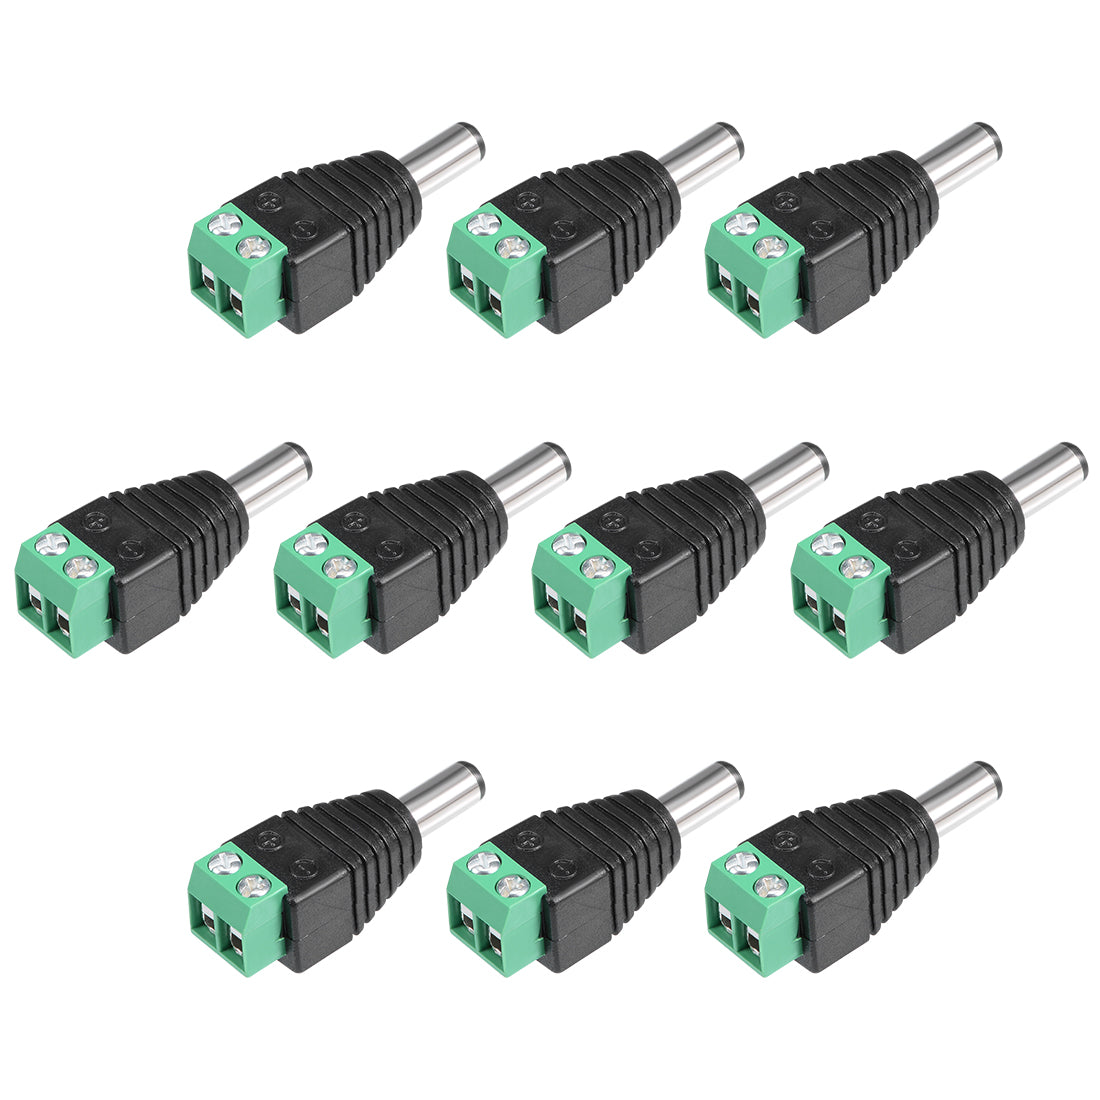 uxcell Uxcell DC Male Connector 5.5x2.1mm Power Jack Adapter 10Pcs for Led Strip CCTV Security Camera Cable Wire Ends